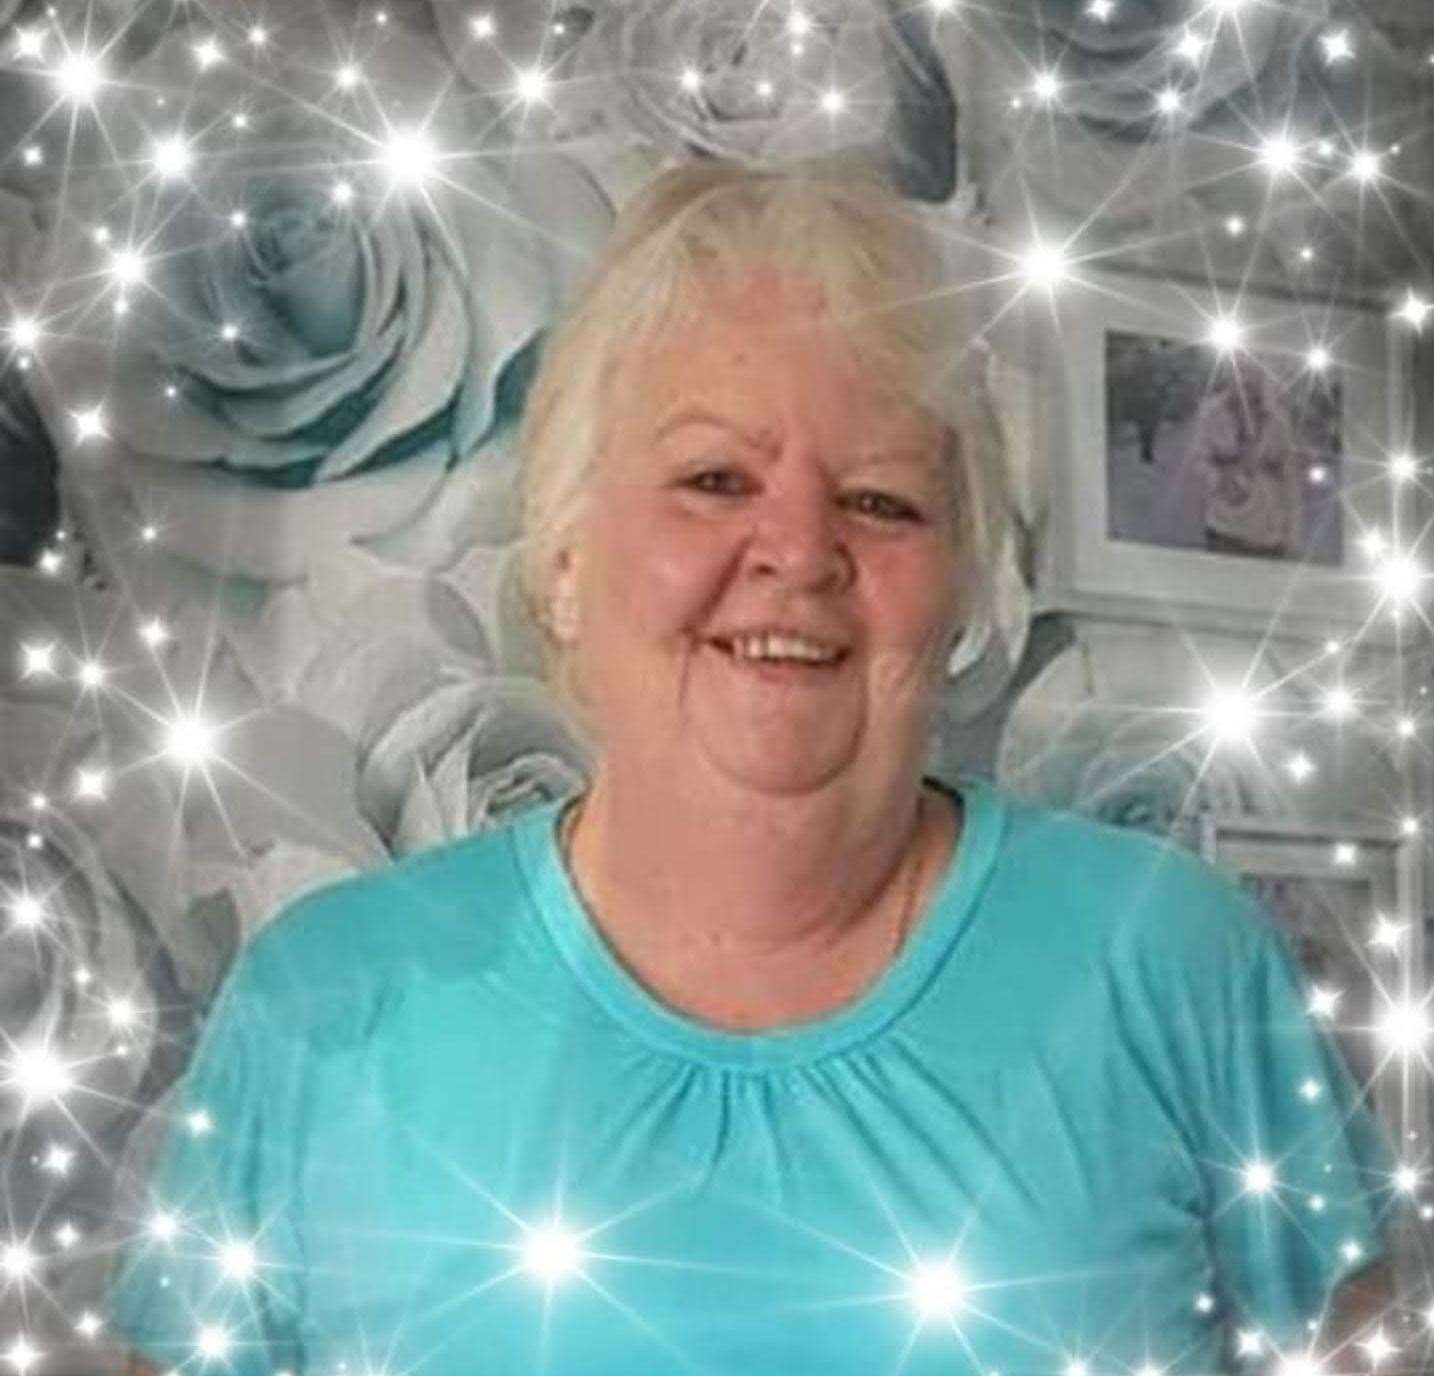 Jan lost her fight with Covid-19 after contracting it two weeks before